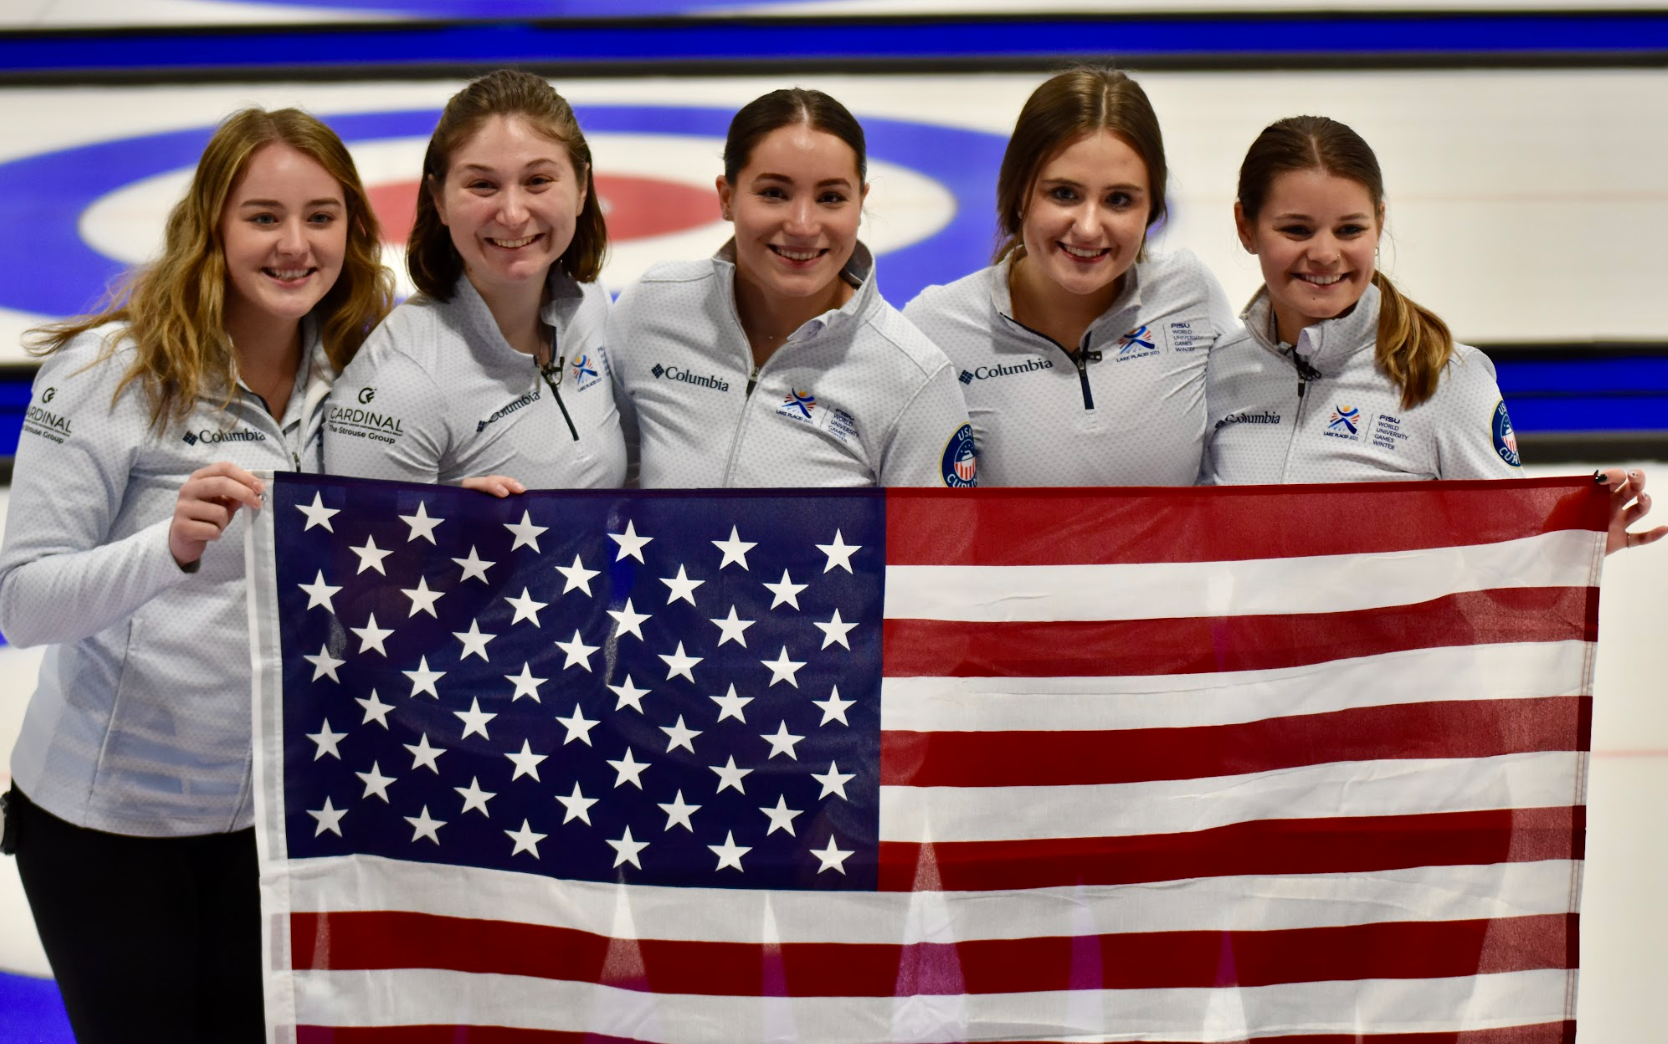 Sydney Mullaney and teammates holding American flag.